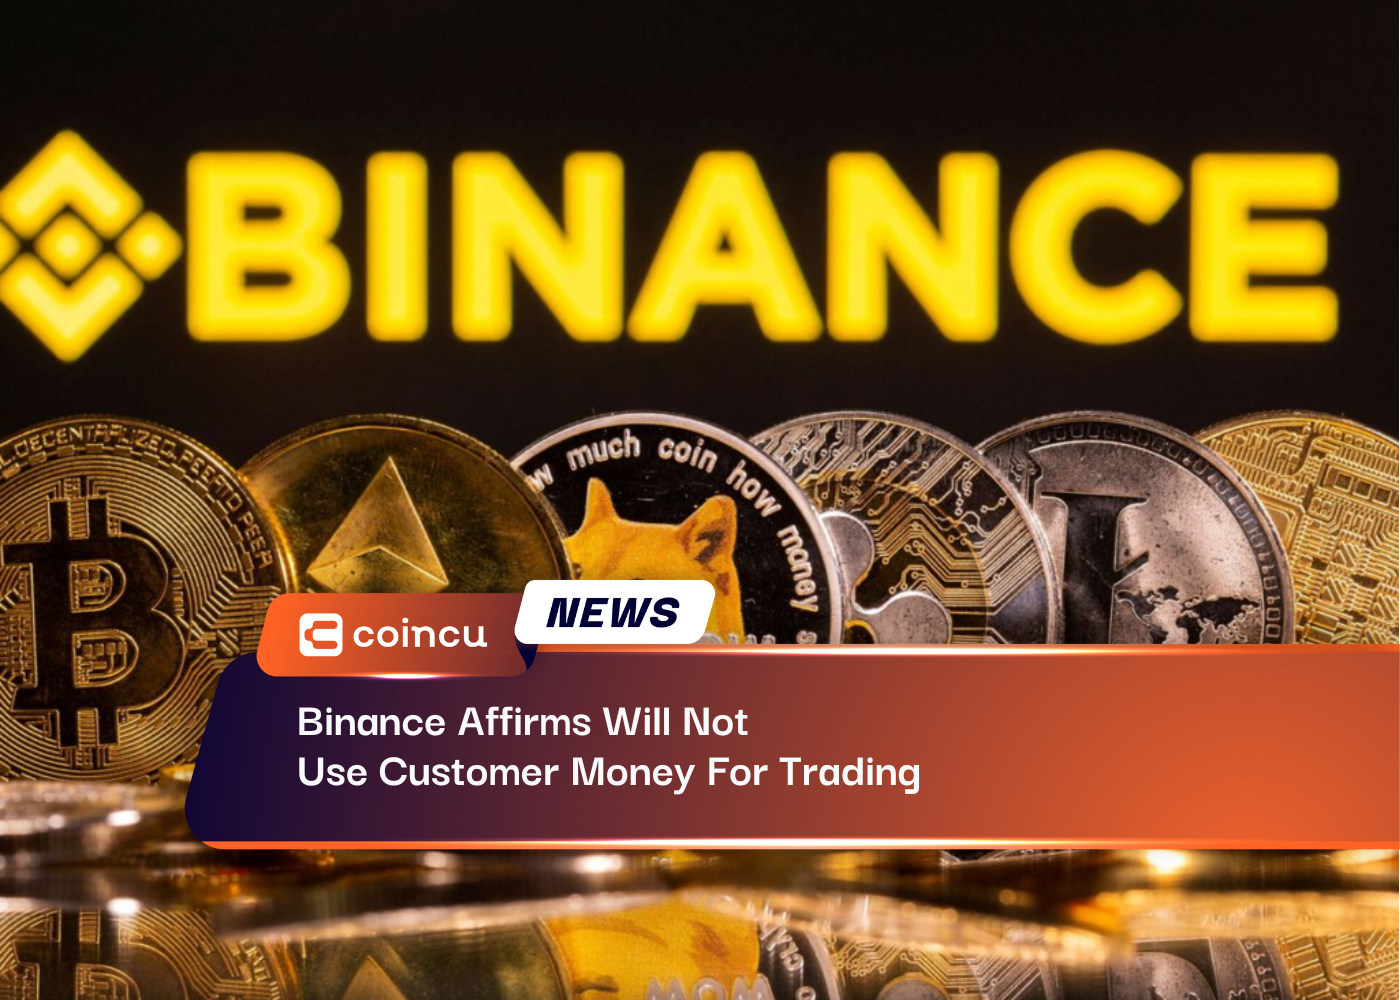 Binance Affirms Will Not Use Customer Money For Trading